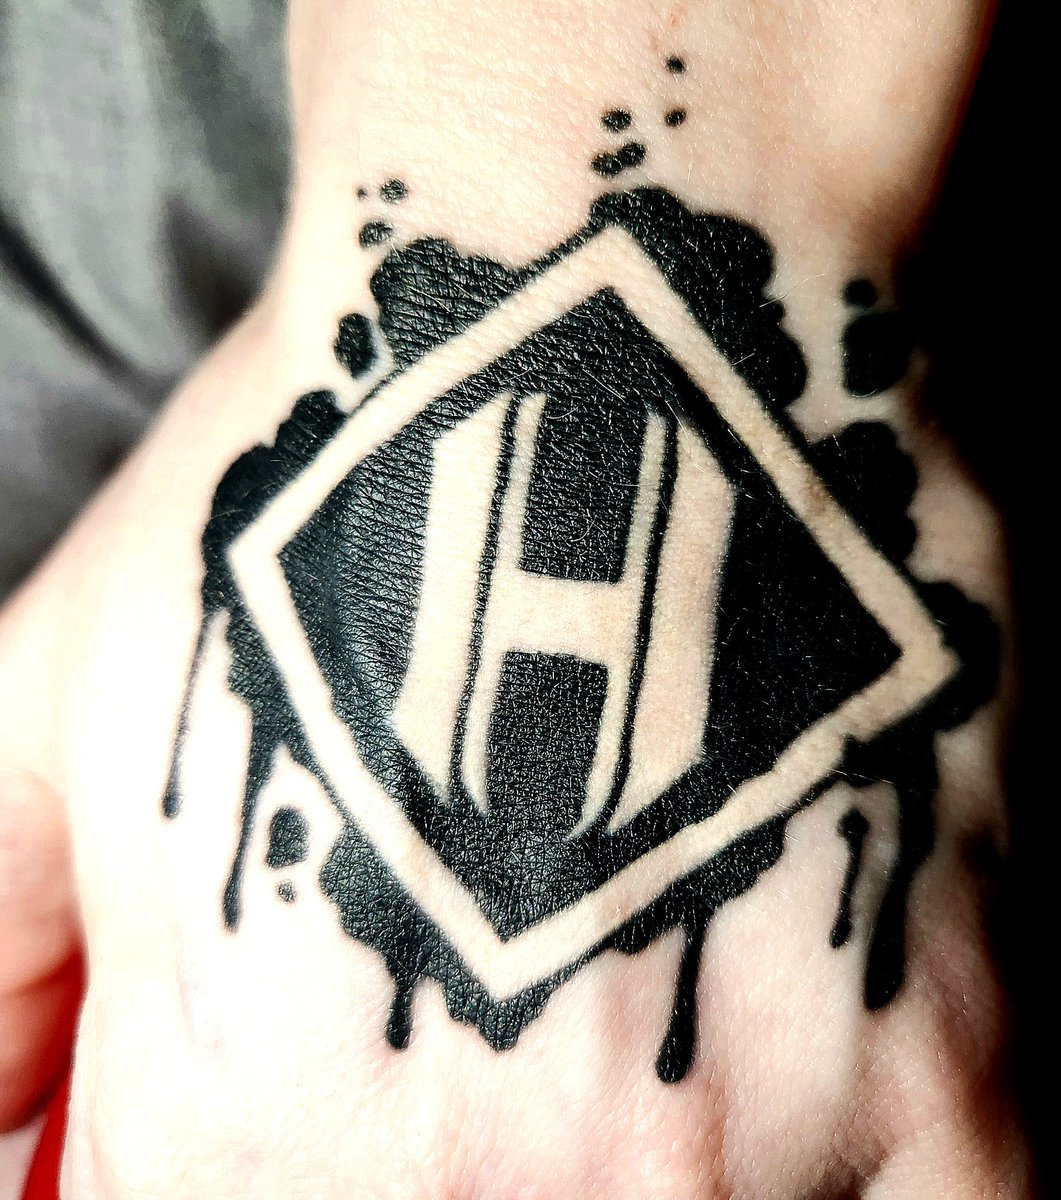 Finally, get to post about this. Went to the @citizensoldiero @iconforhire and @Halocene concert in Tennessee last night and surprised Halocene with this. They loved it, so yay!